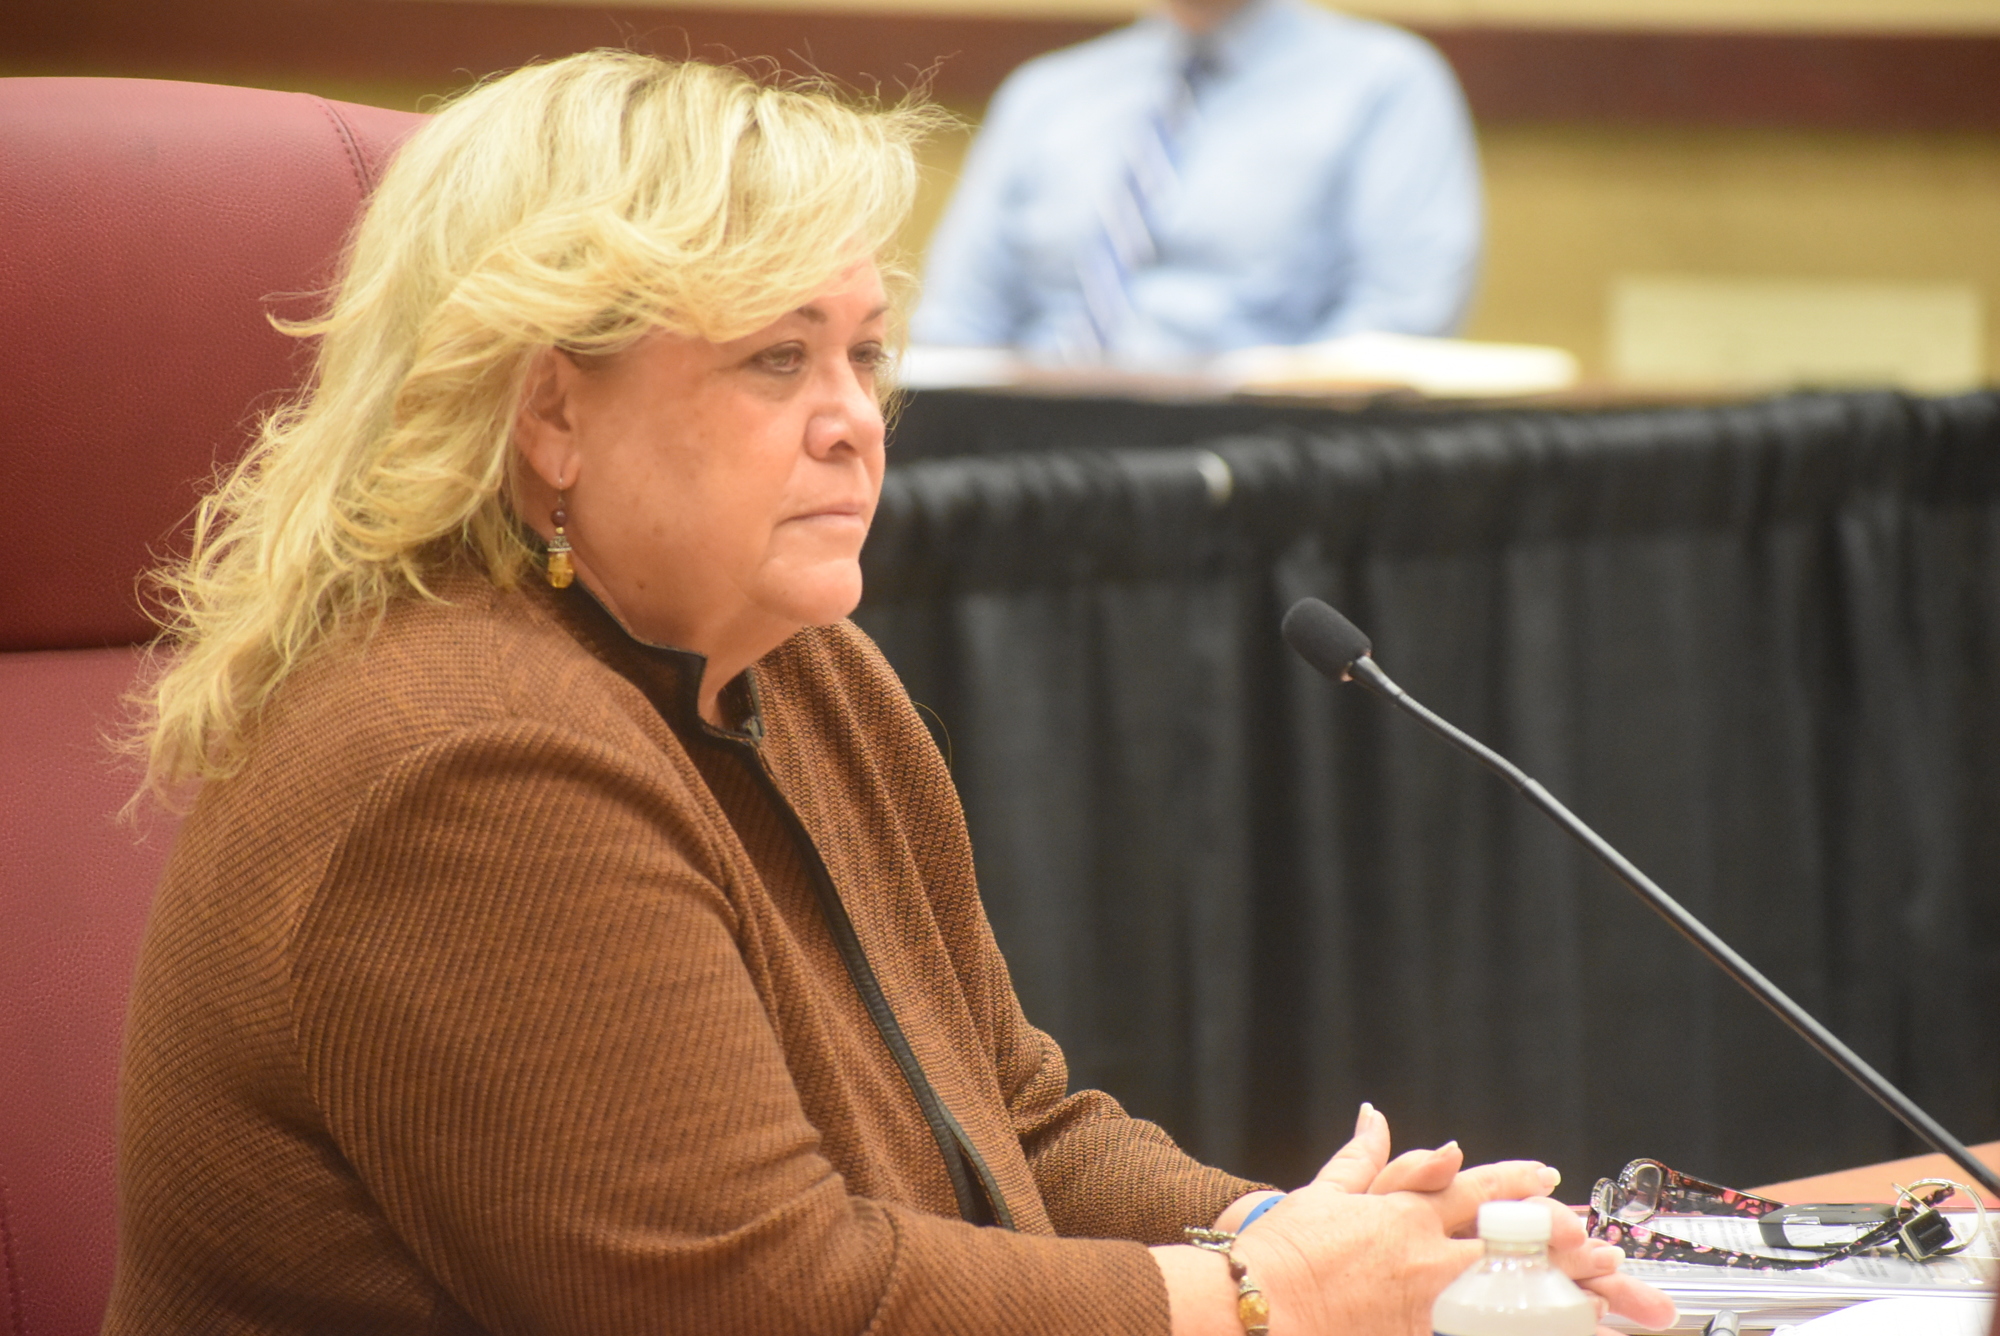 Manatee County administrator Cheri Coryea's future will be decided at a Jan. 6 special meeting.